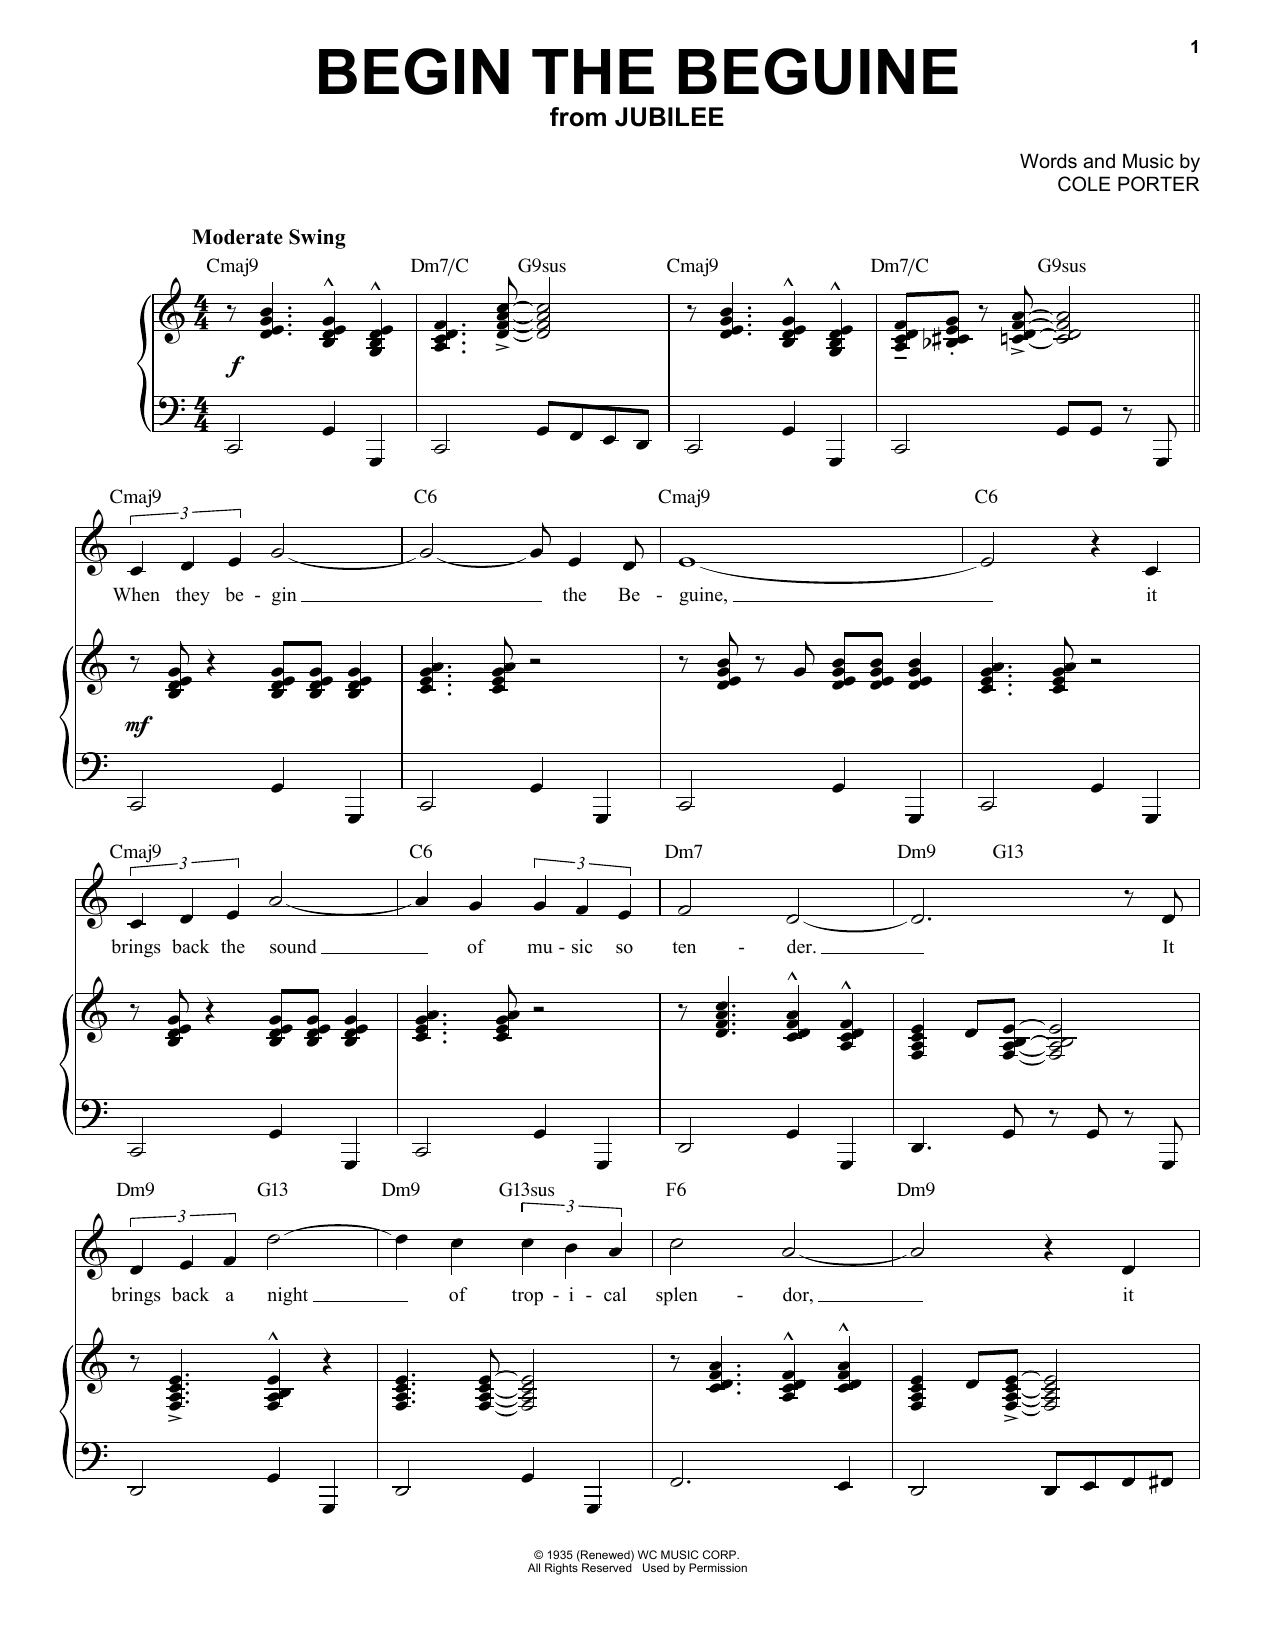 Cole Porter Begin The Beguine Jazz Version From Jubilee Arr Brent Edstrom Sheet Music Pdf Notes Chords Jazz Score Piano Vocal Download Printable Sku